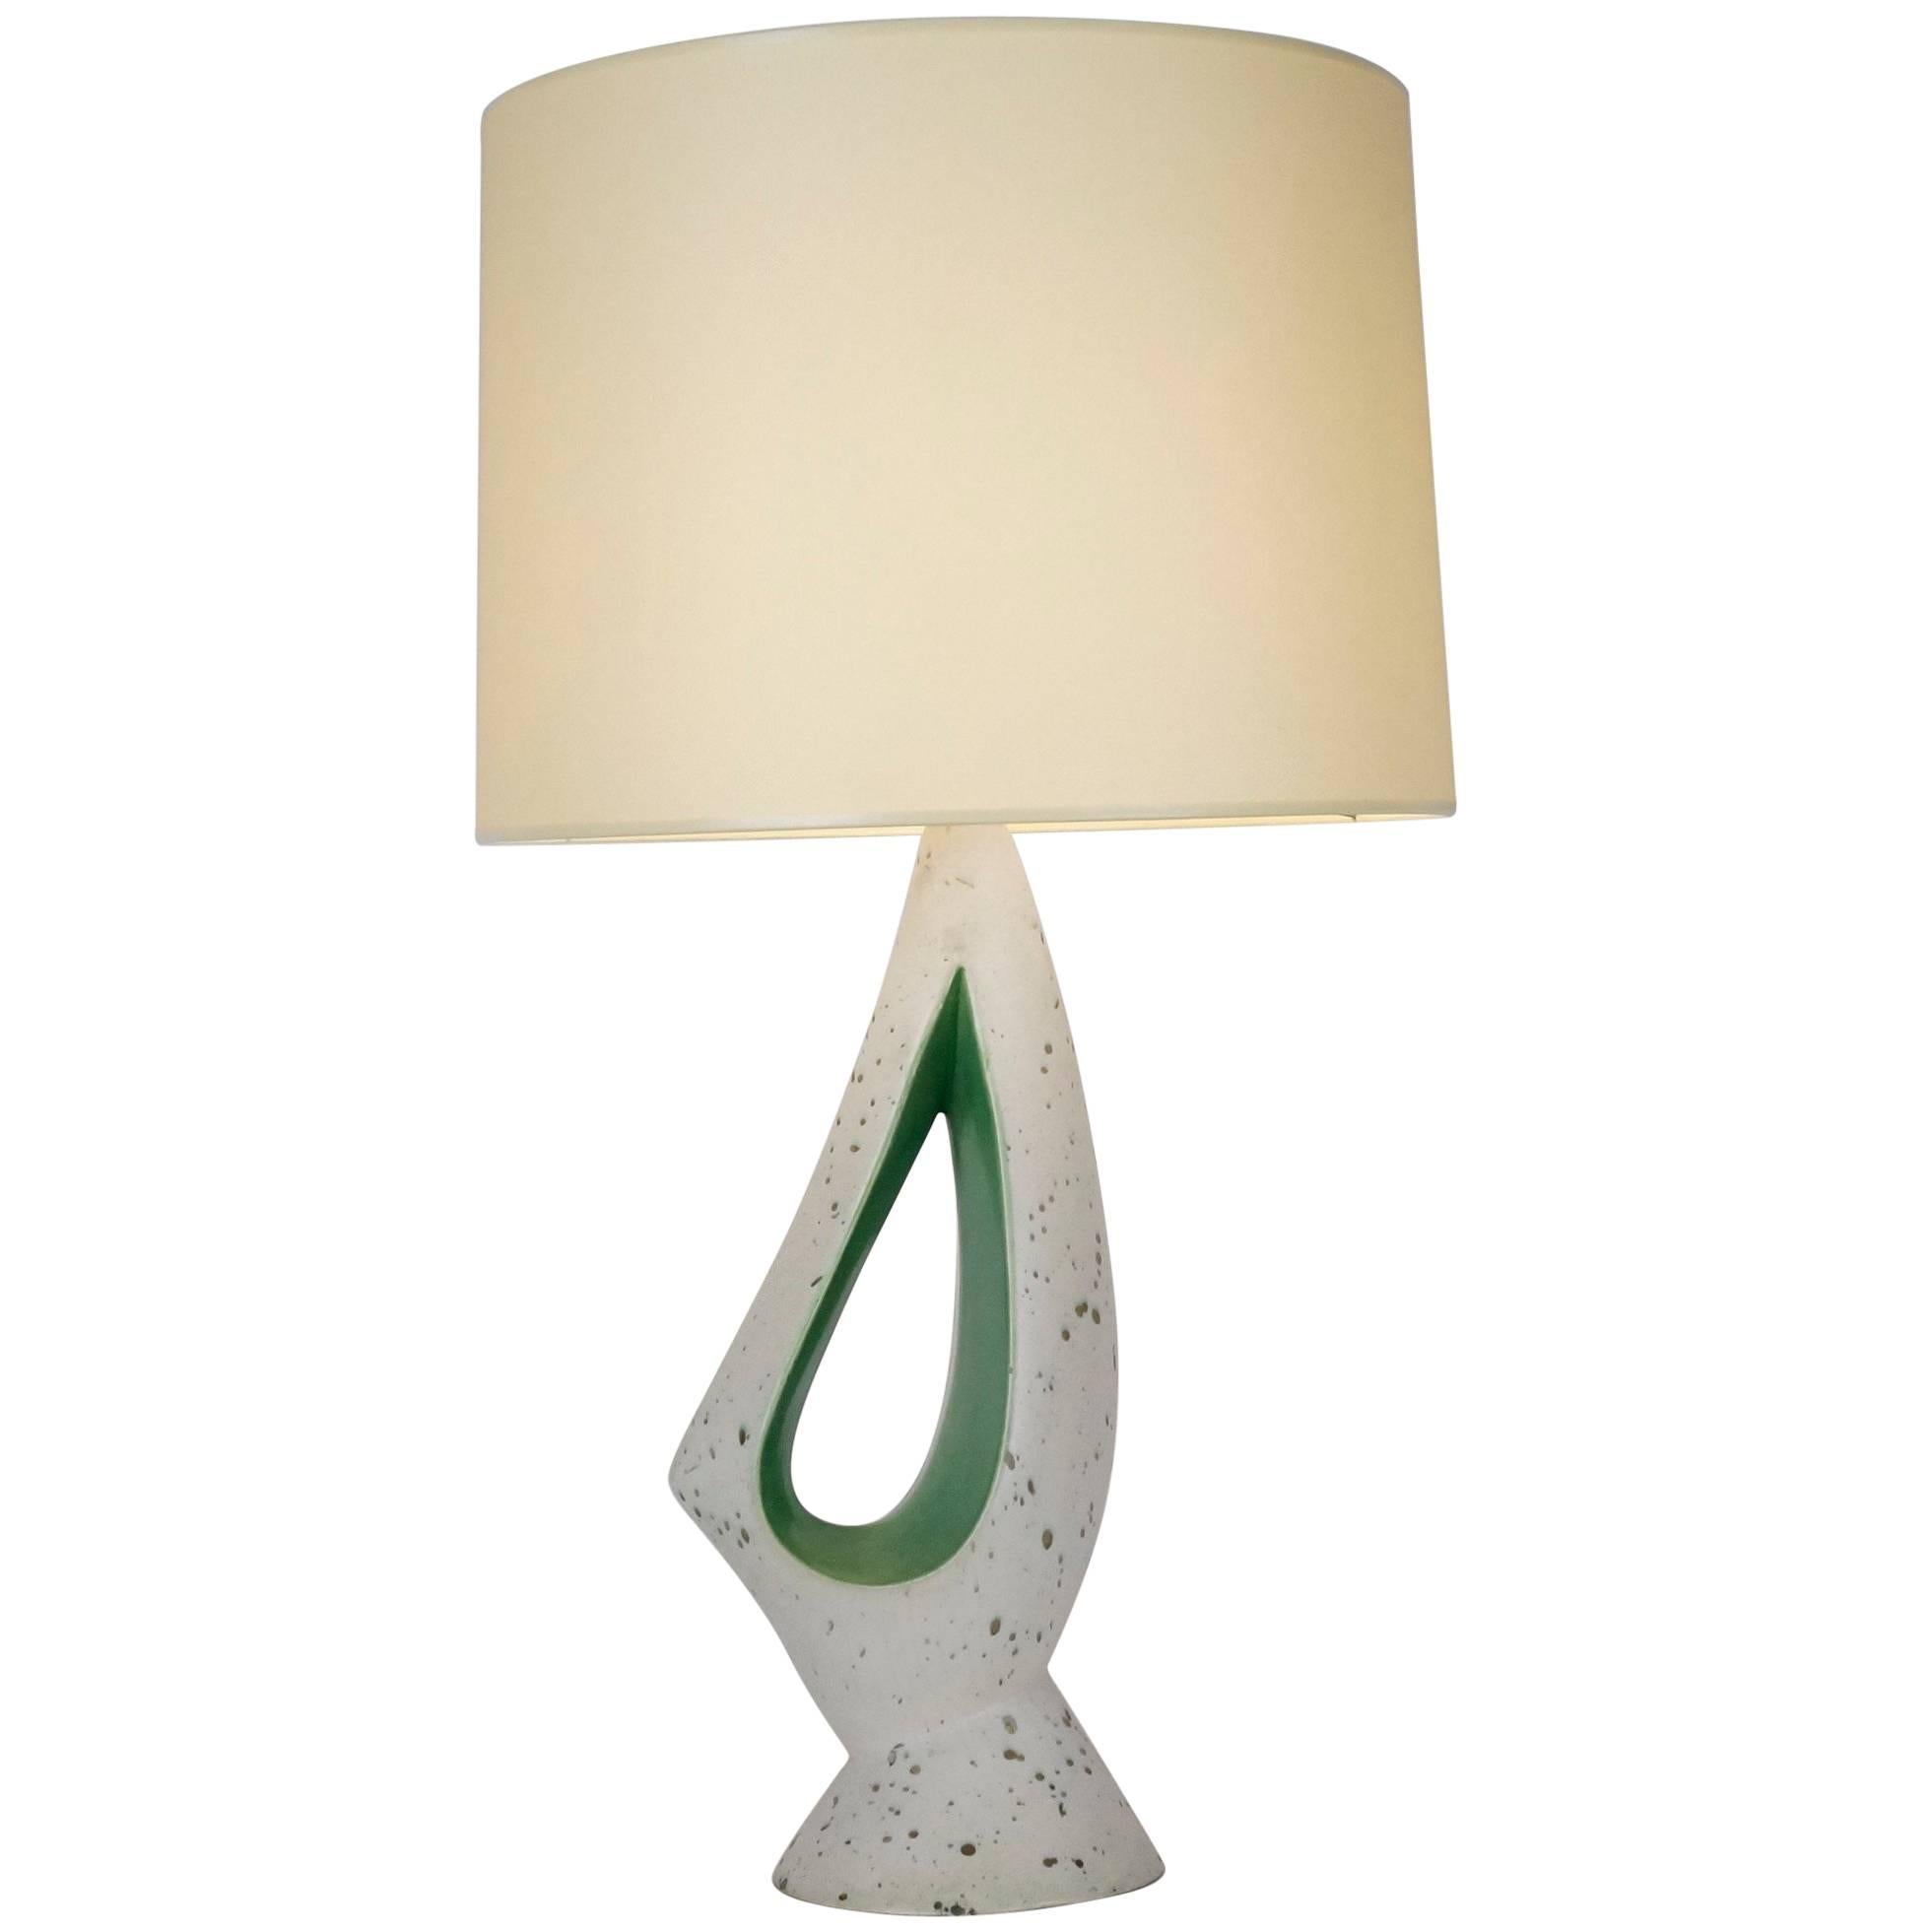 1970 White and Green Ceramic Table Lamp